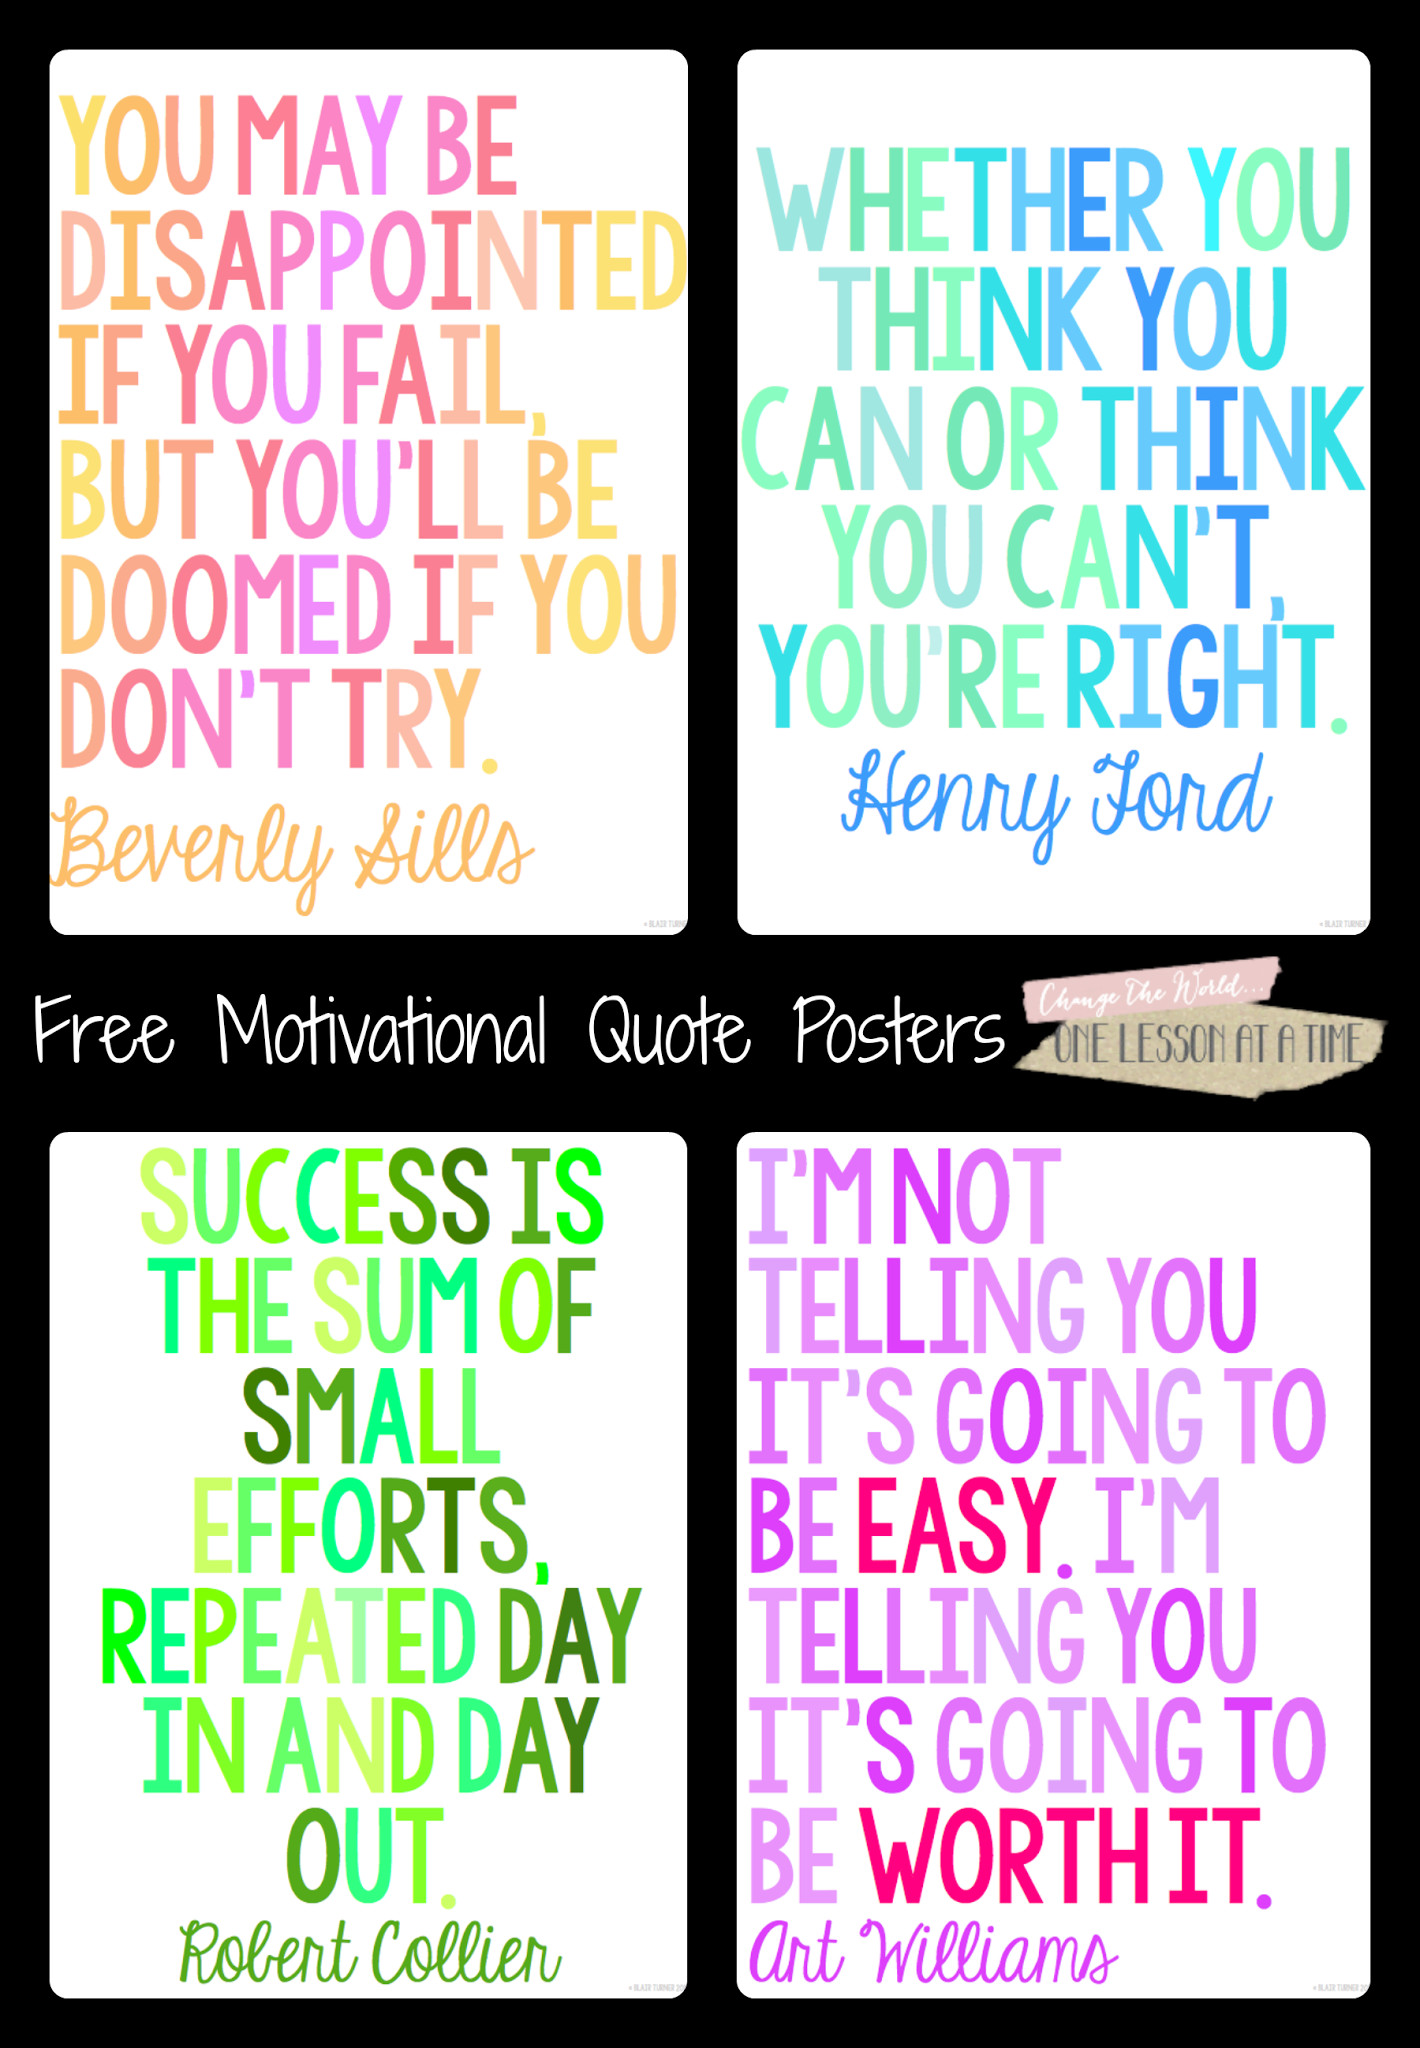 Middle School Motivational Quotes
 Inspirational Quotes For Middle School QuotesGram